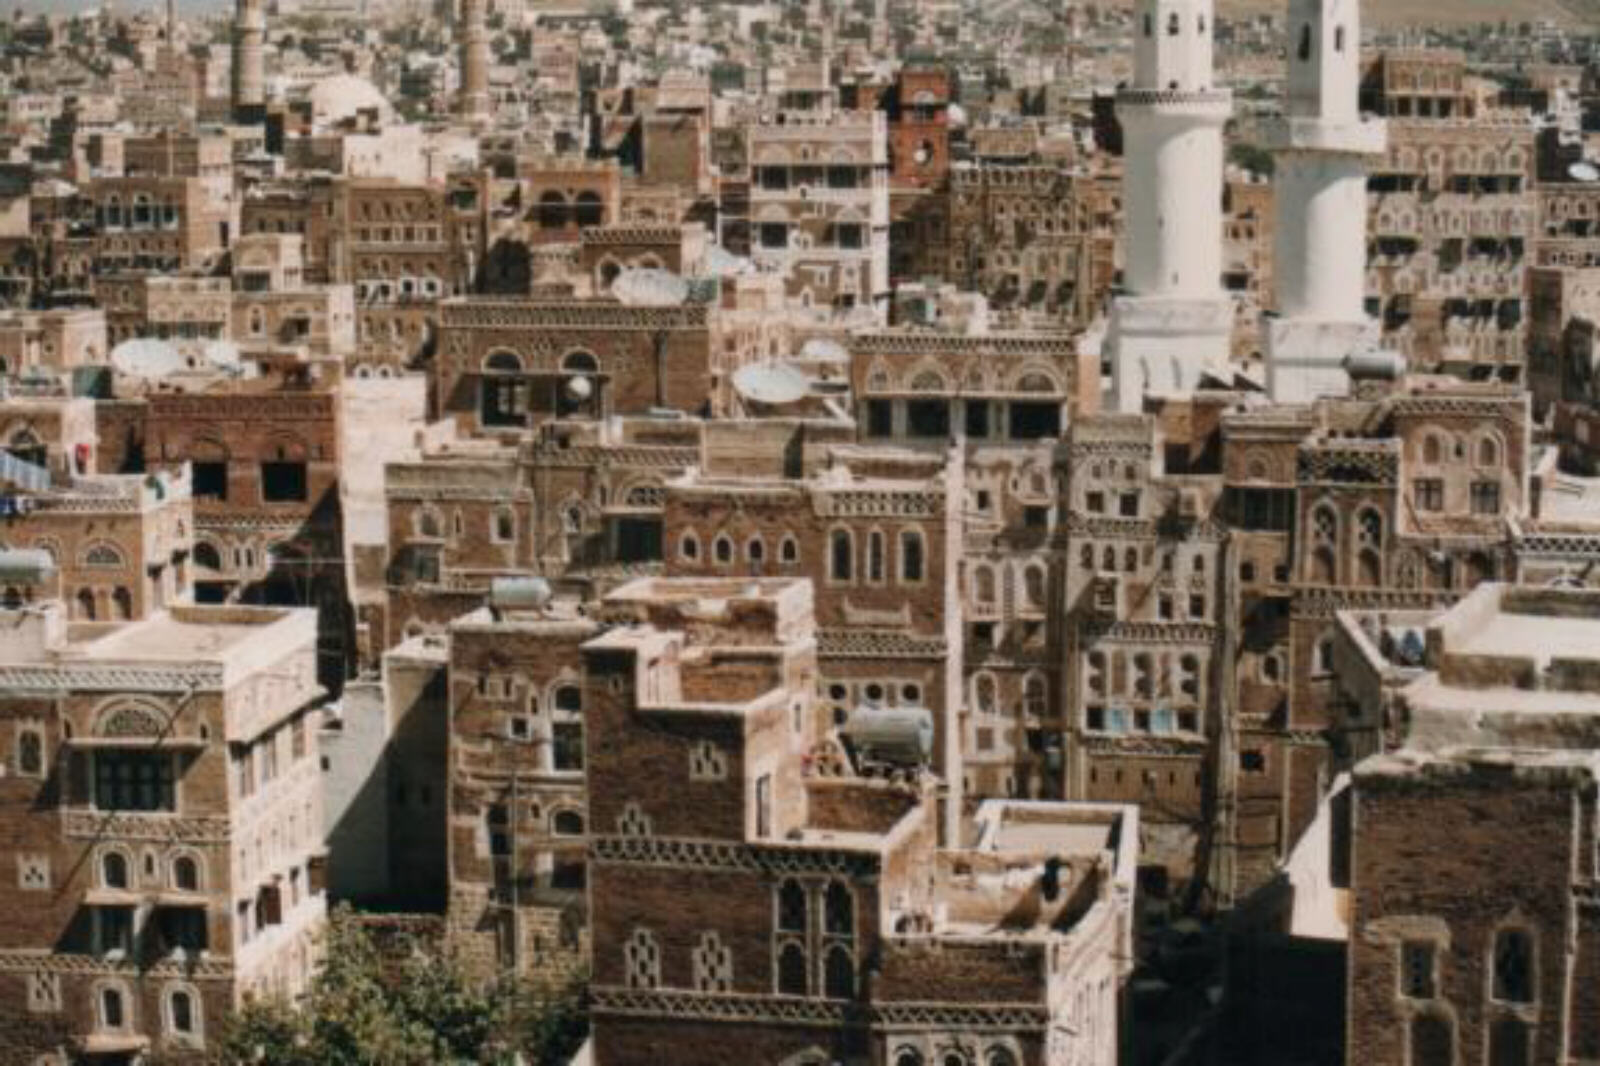 View of Sanaa city from the Old Sanaa Palace hotel